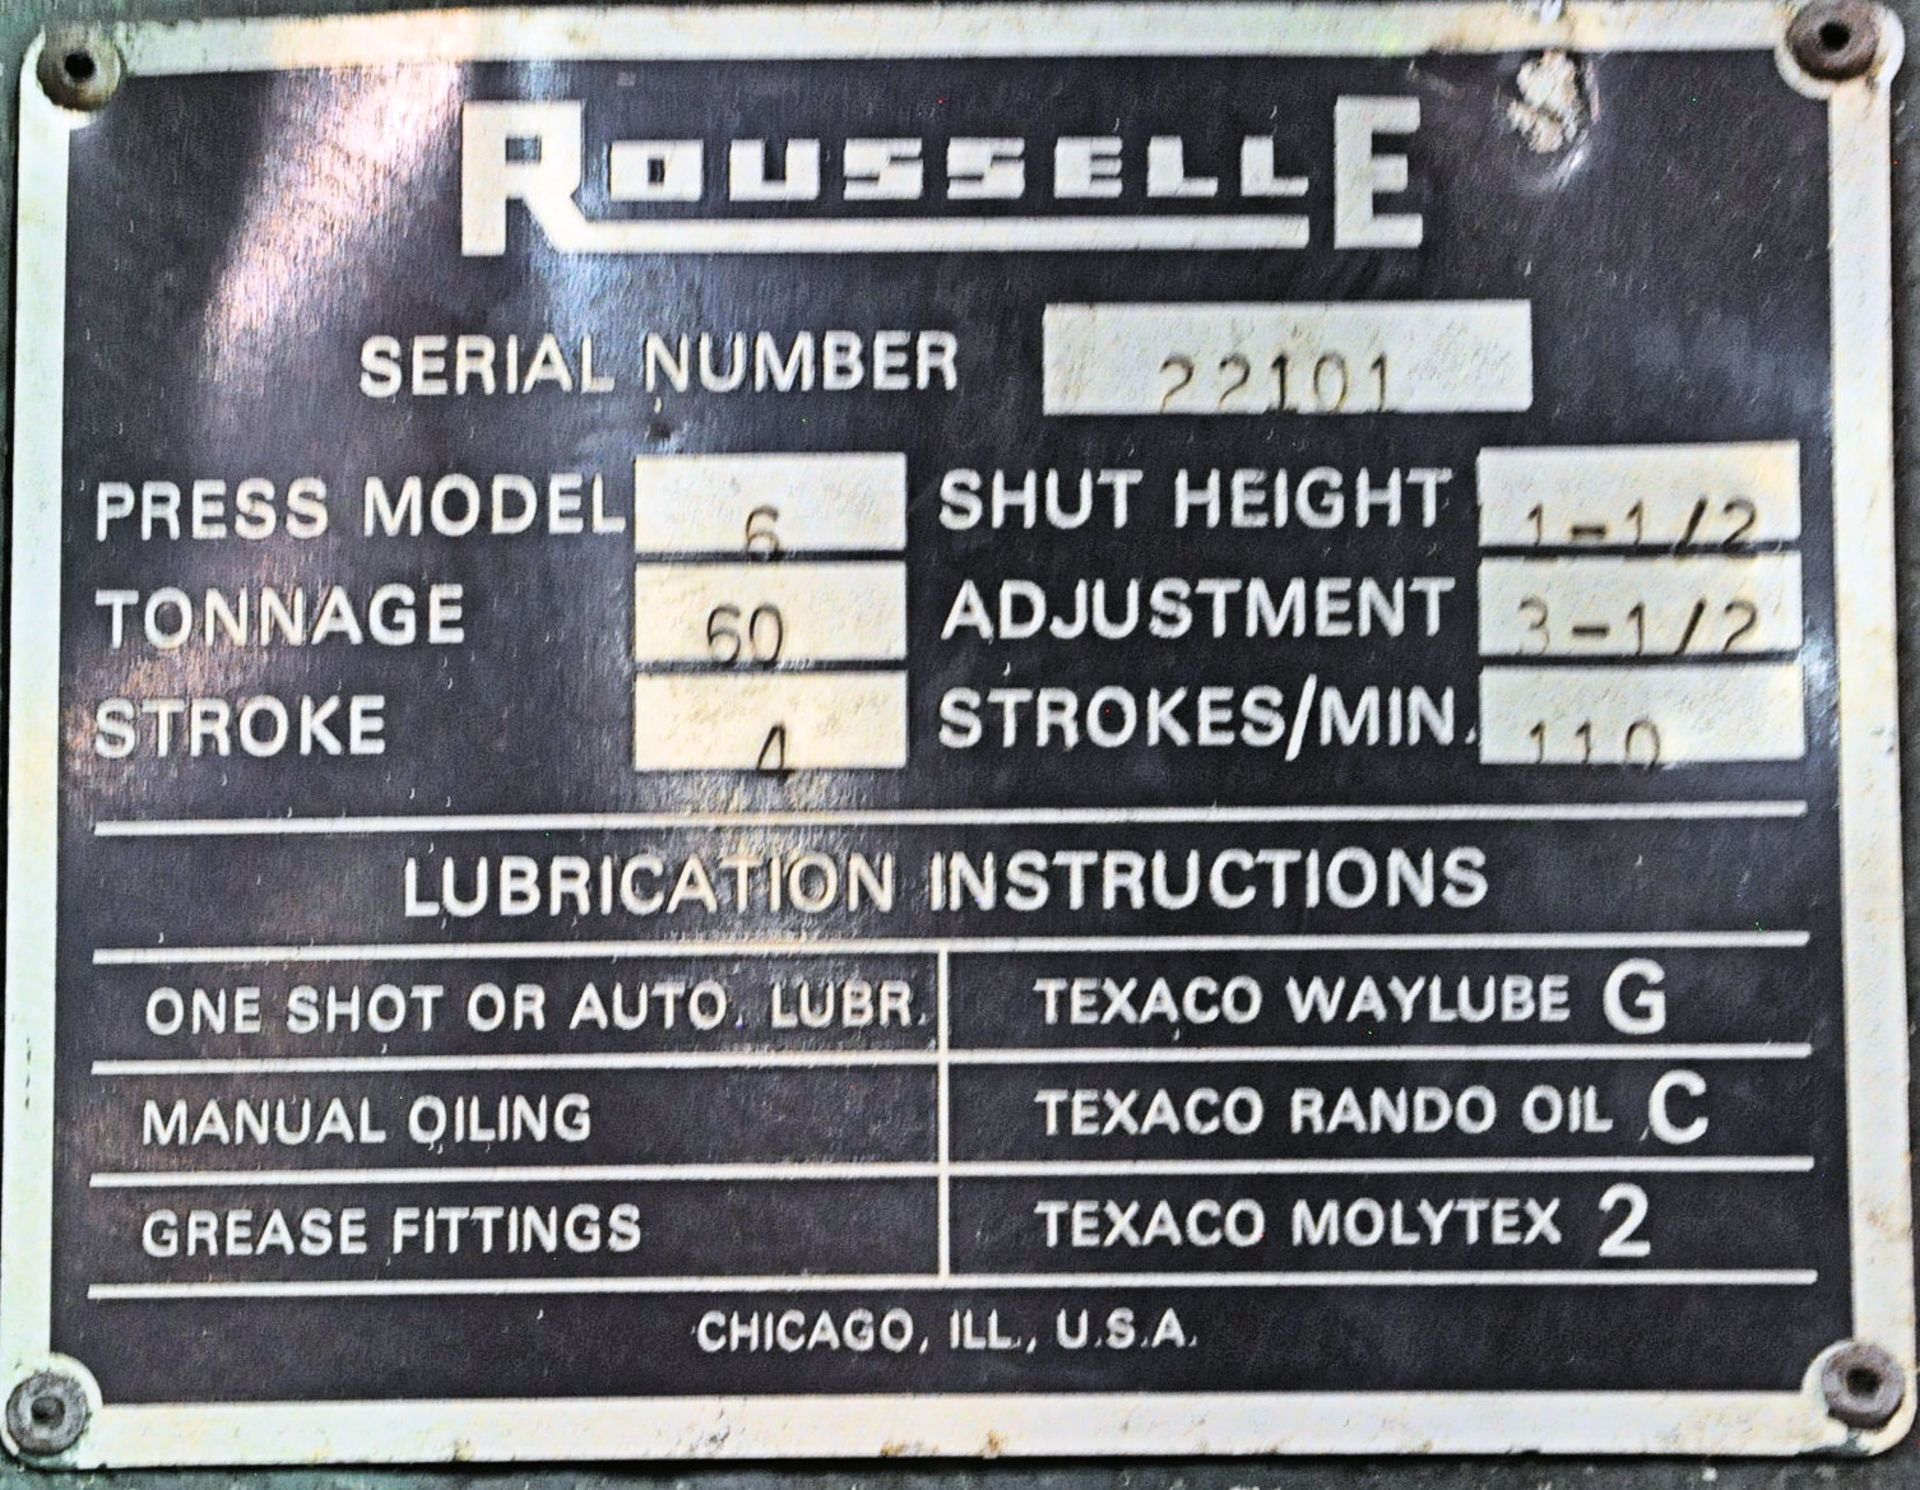 Rousselle Model 6, 60-Ton Capacity Air Clutch Open Back Press - Image 3 of 3